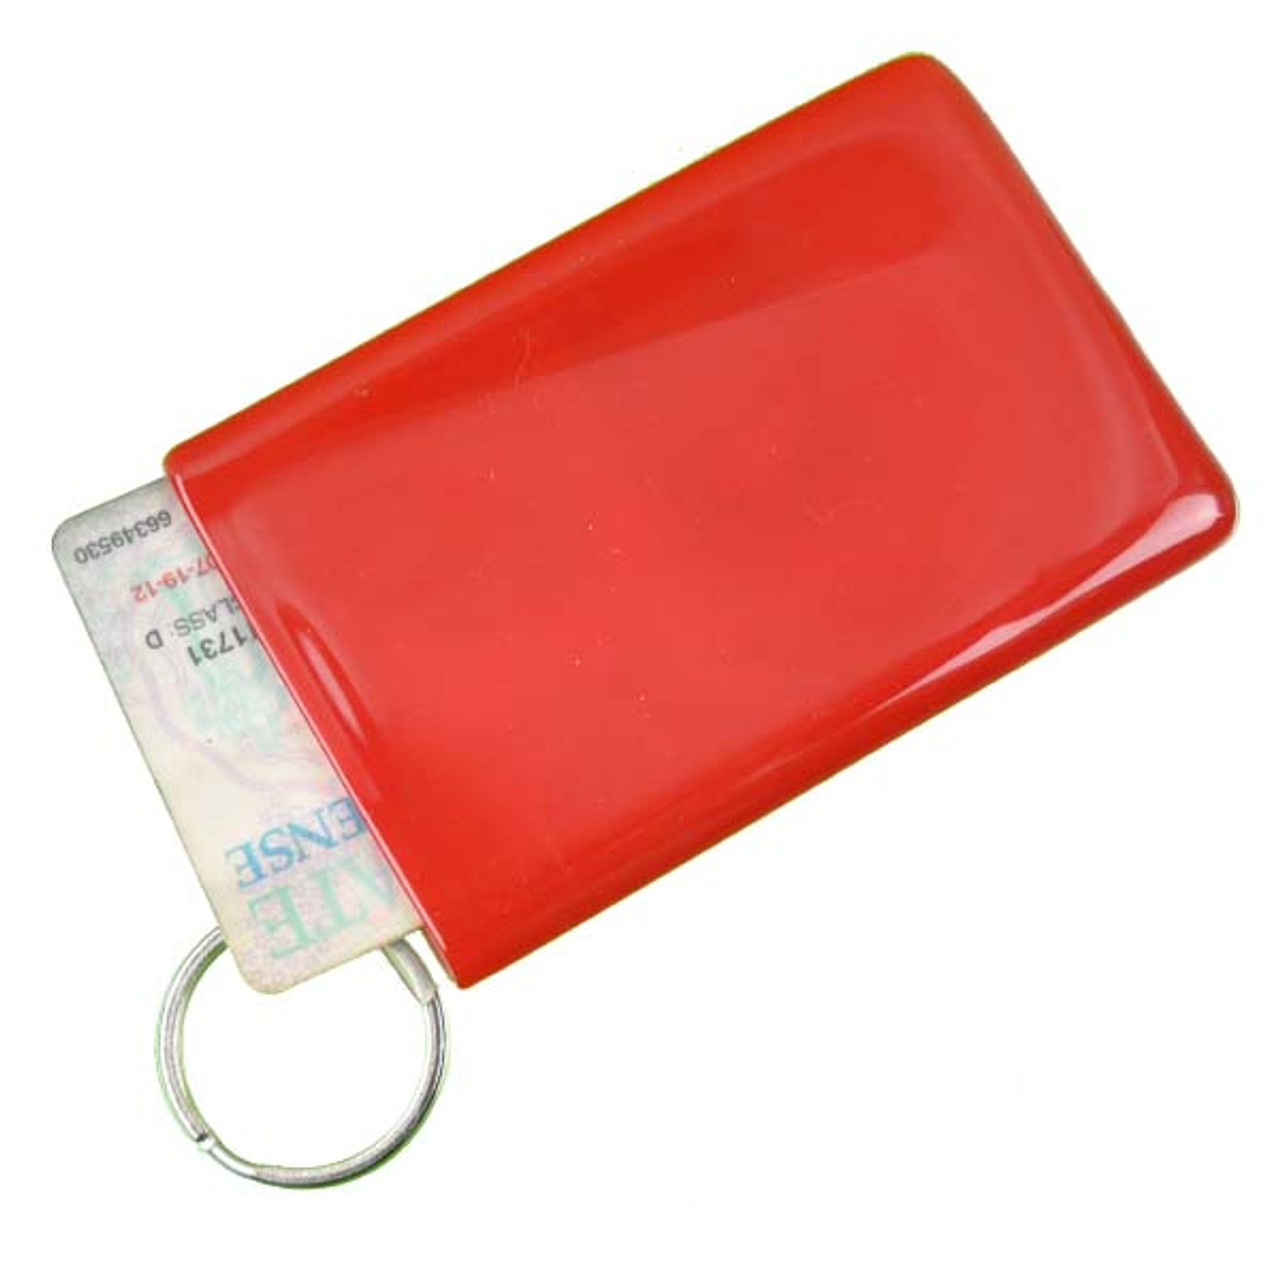 Shop for and Buy Fleet Key-Per Pouch at . Large selection and  bulk discounts available.